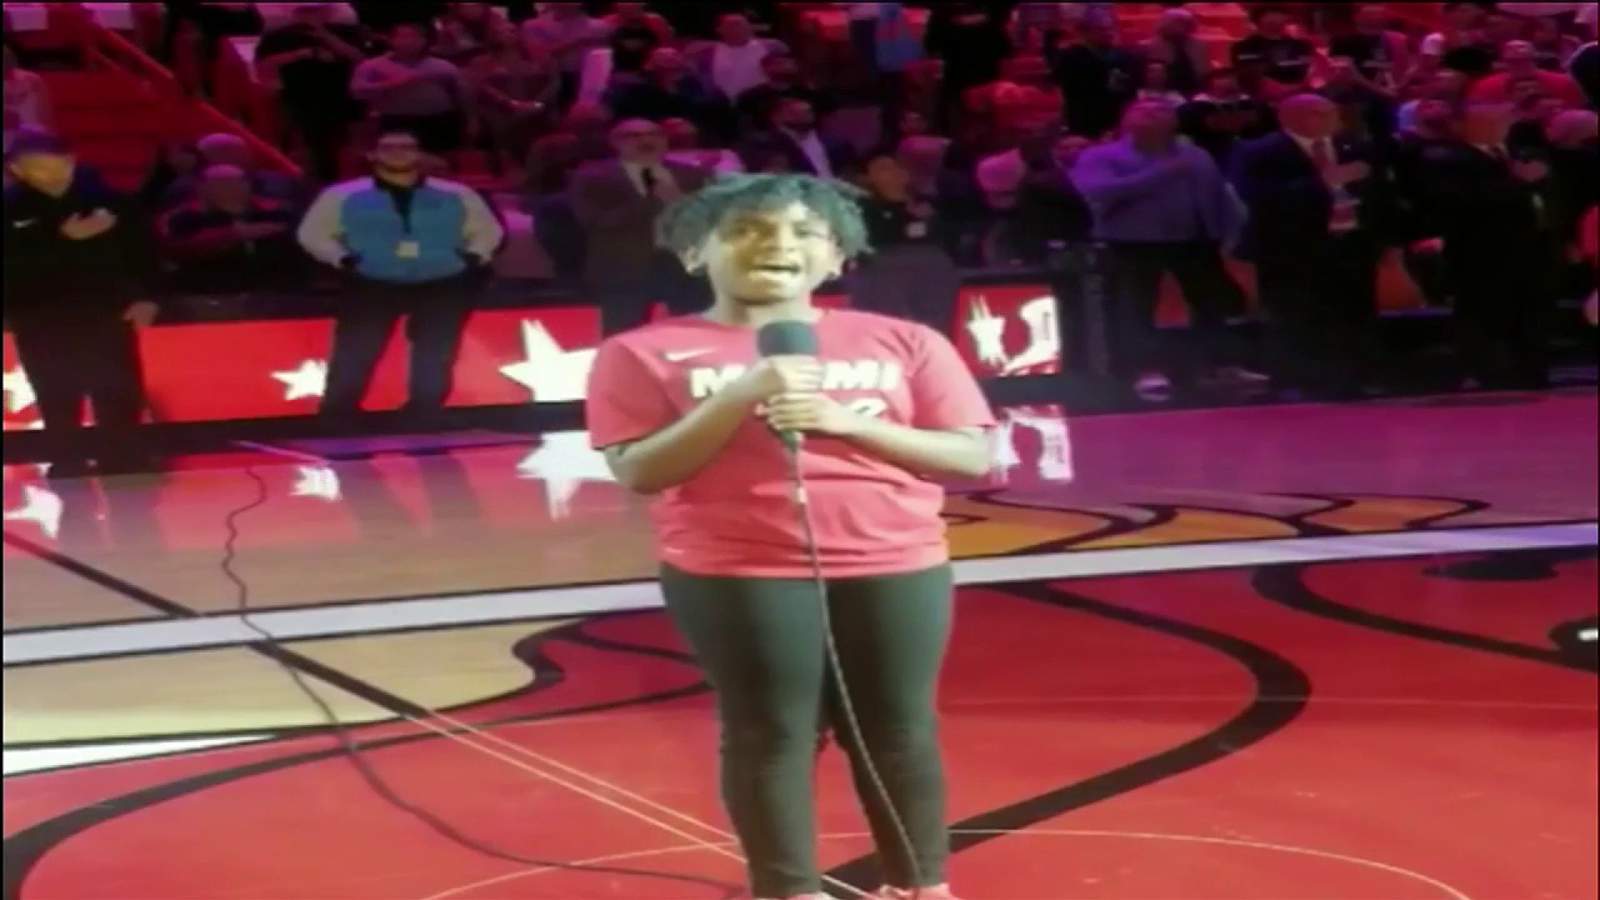 11-year-old basking in anthem performance at Wade ceremony